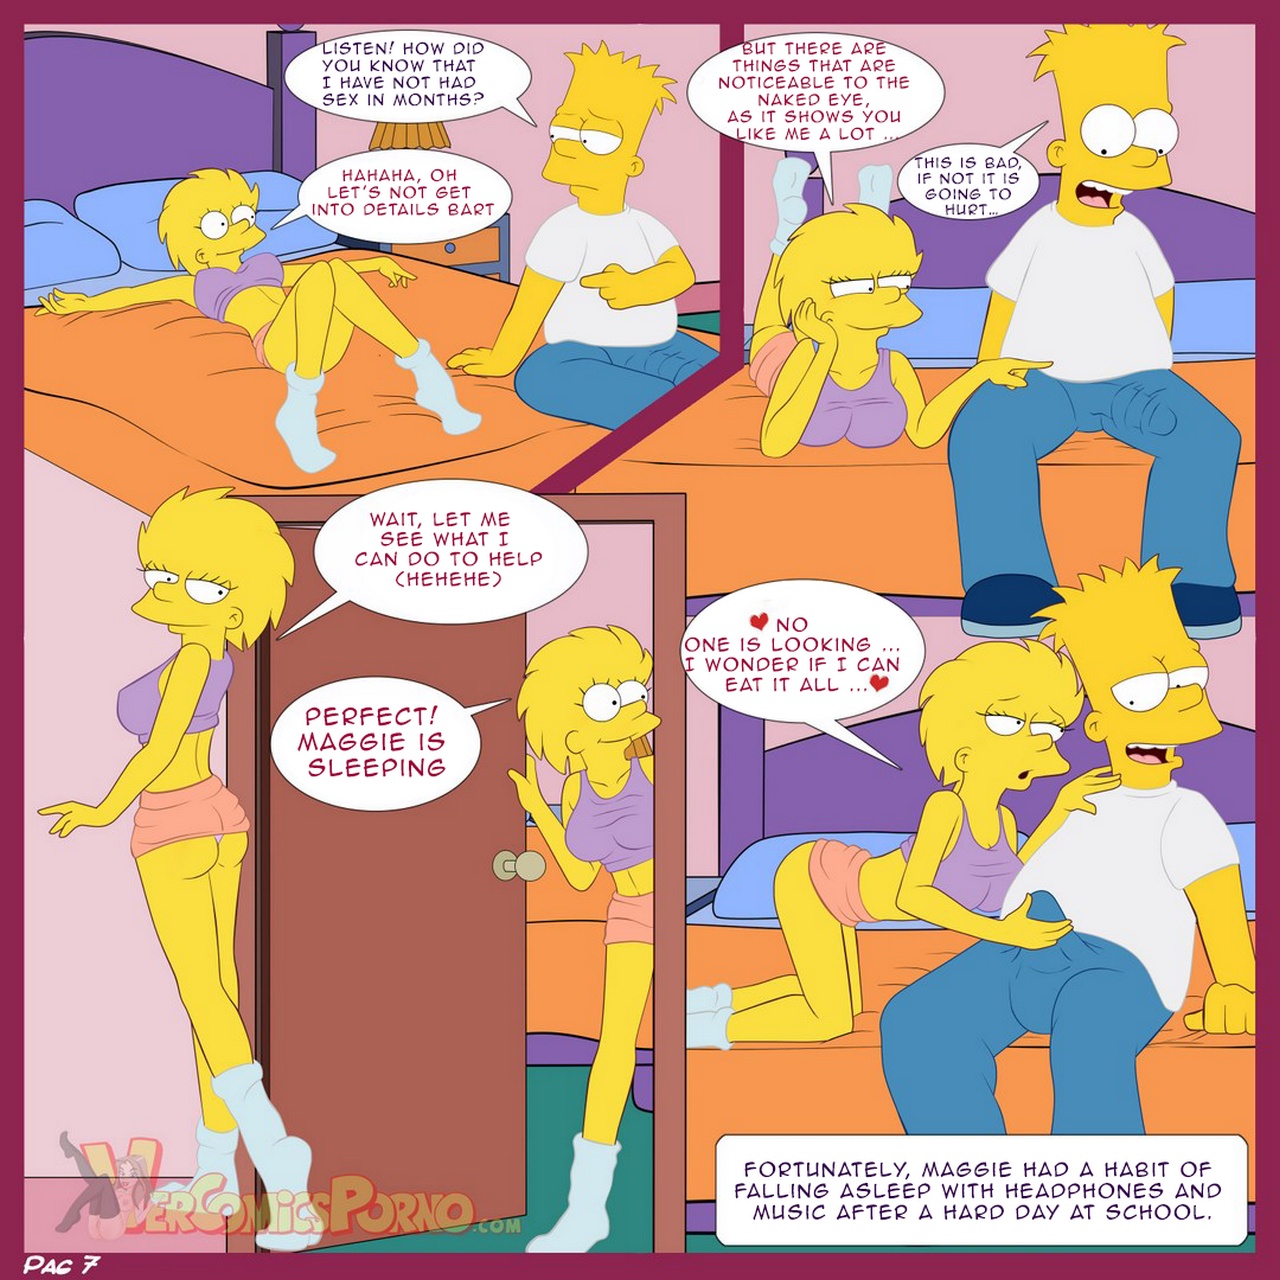 The Simpsons 1 - A Visit From The Sisterch